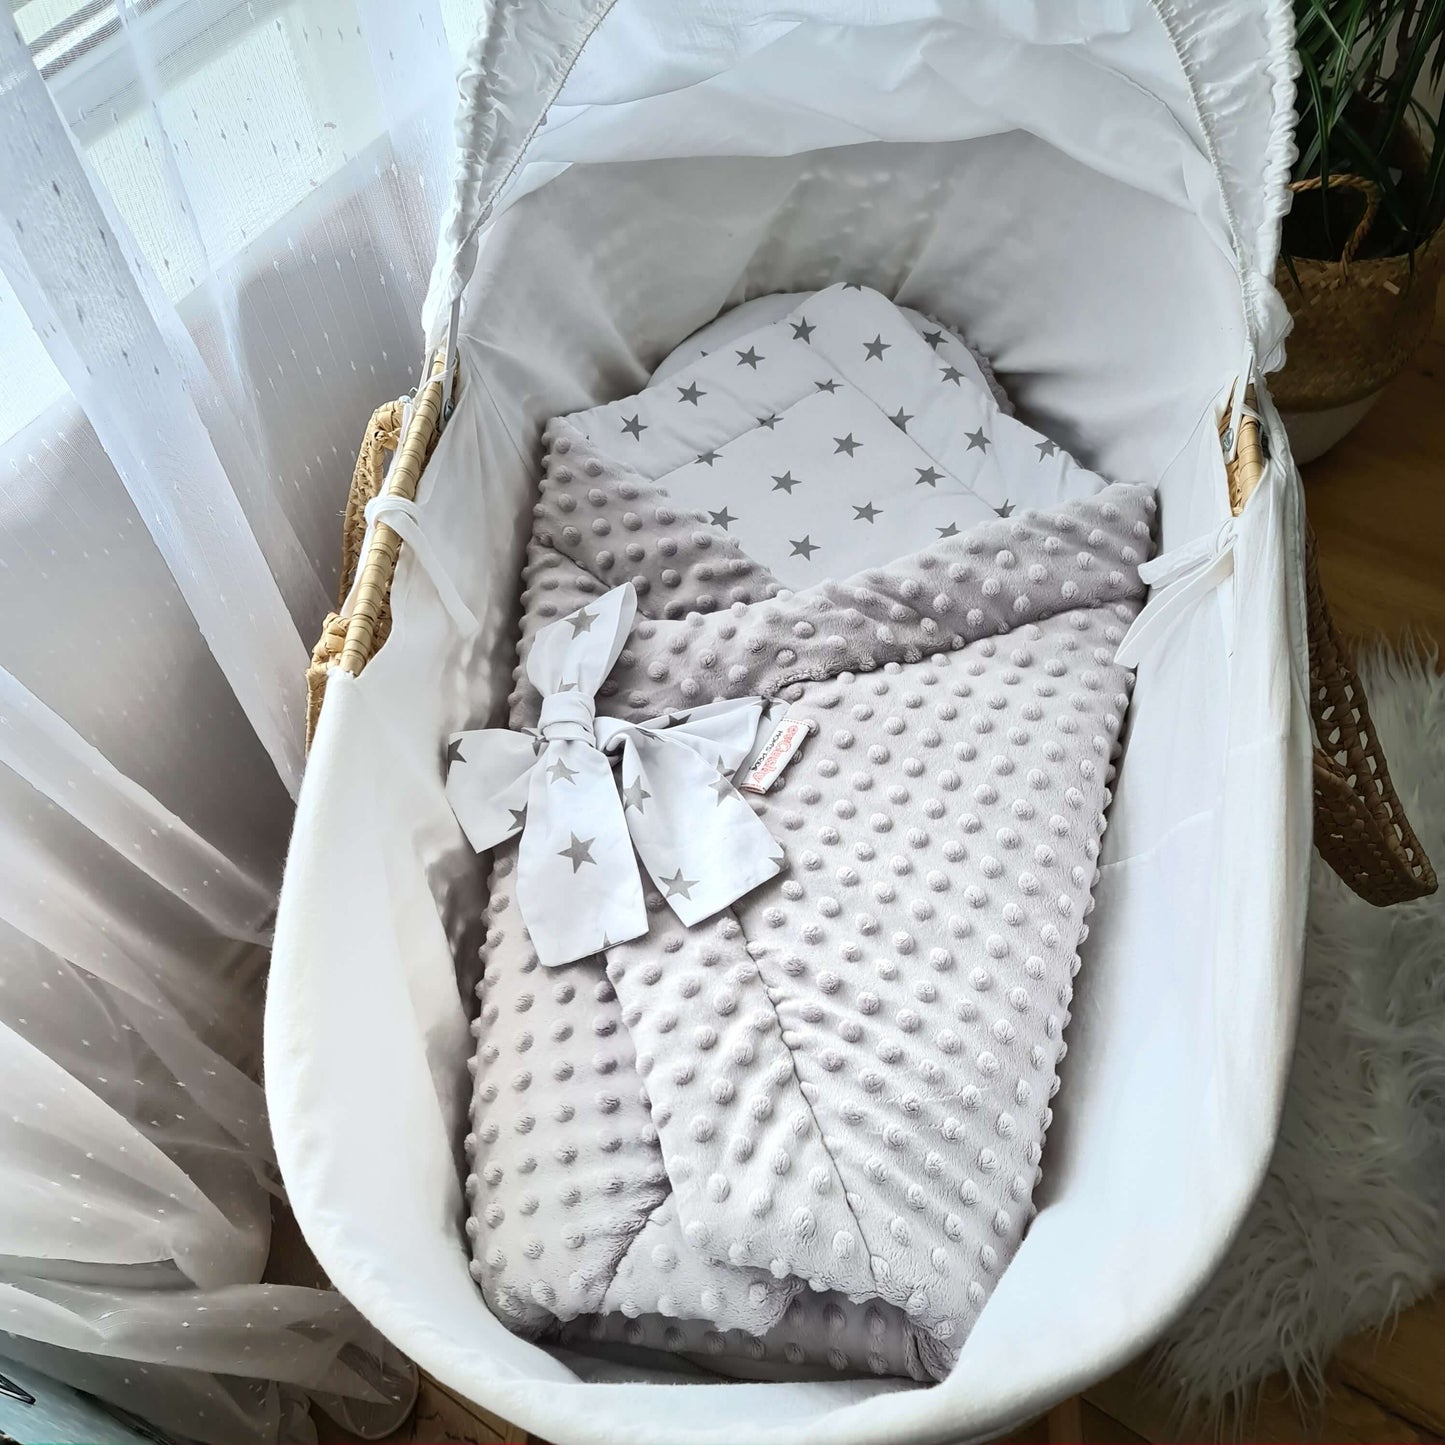 warm cosy first blanket for a baby